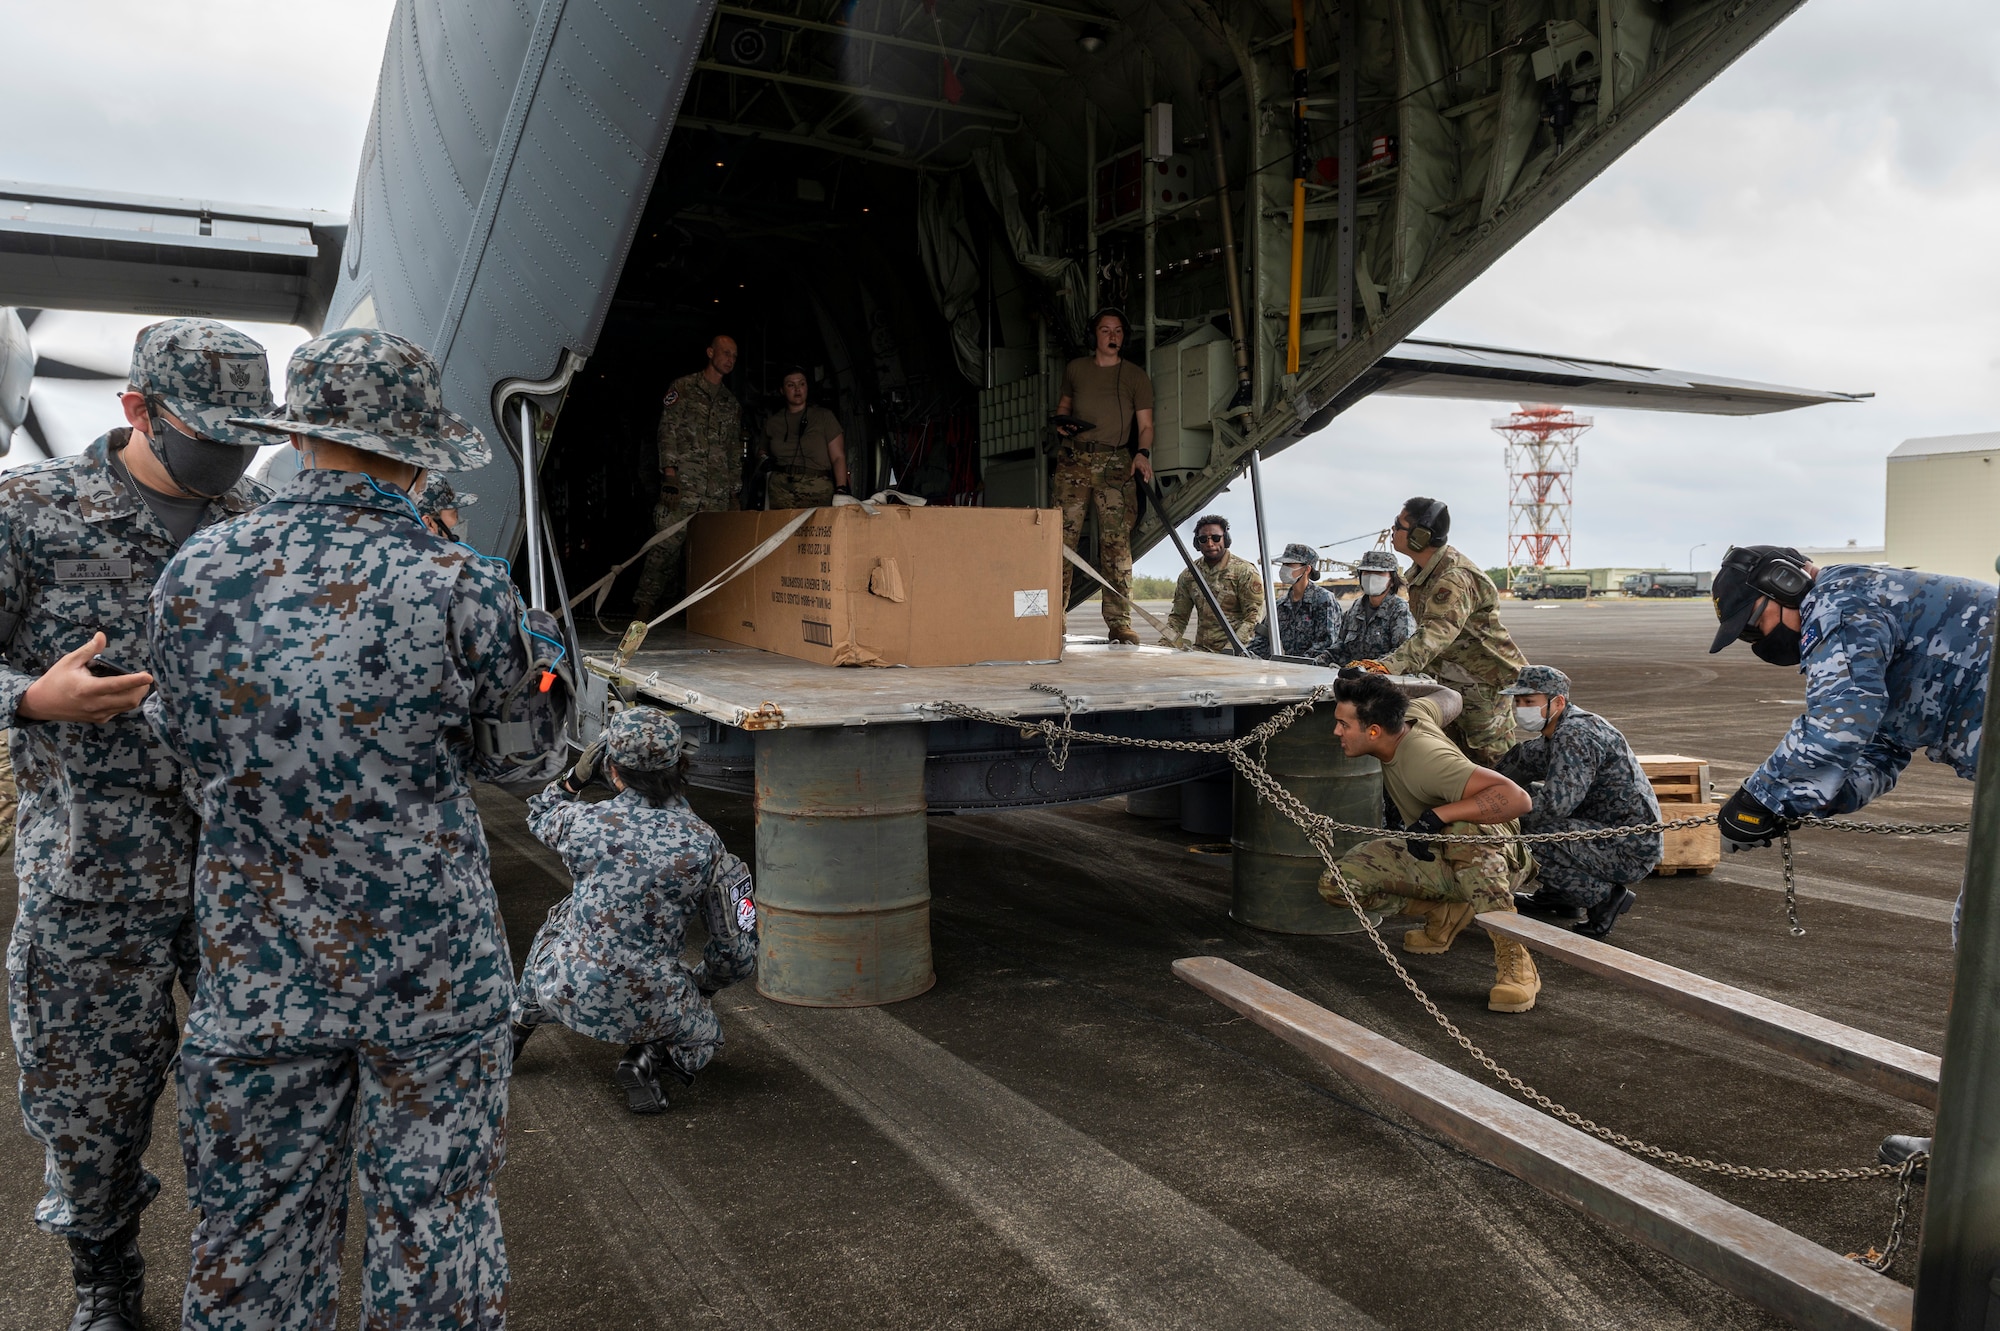 A team of U.S. Air Force, Japan Maritime Self-Defense Force, and Royal Australian Air Force members pull a large cargo pallet from a 36th Airlift Squadron C-130J Super Hercules onto storage barrels using combat offloading during the Cope North 23 exercise, on the remote island of Iwo Jima, Japan, Feb. 21, 2023.